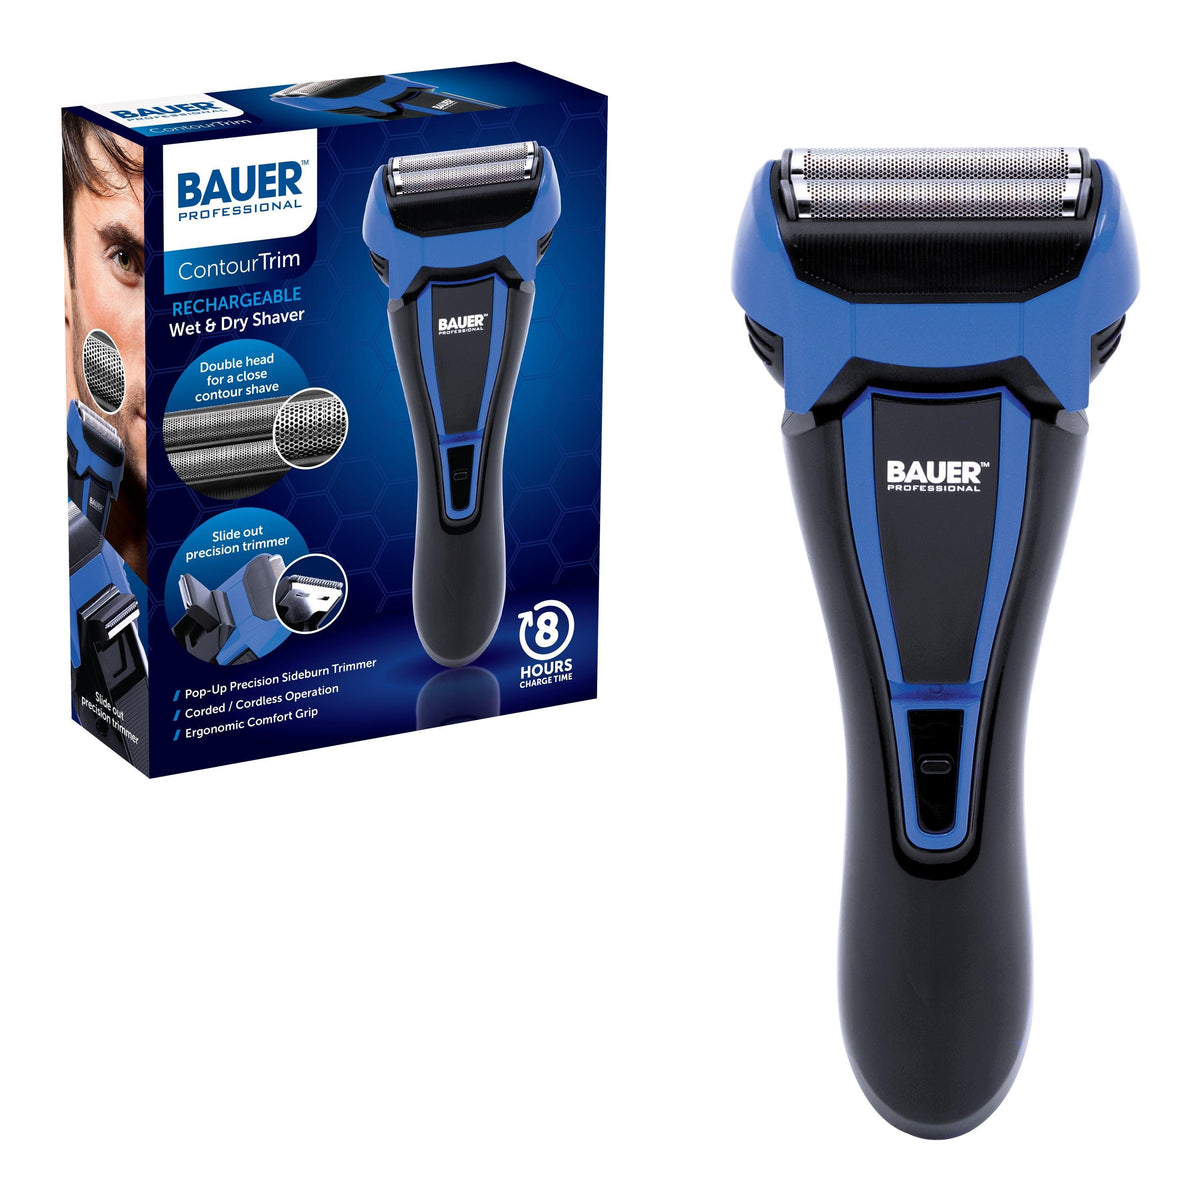 Bauer Professional Rechargeable Shaver - Choice Stores